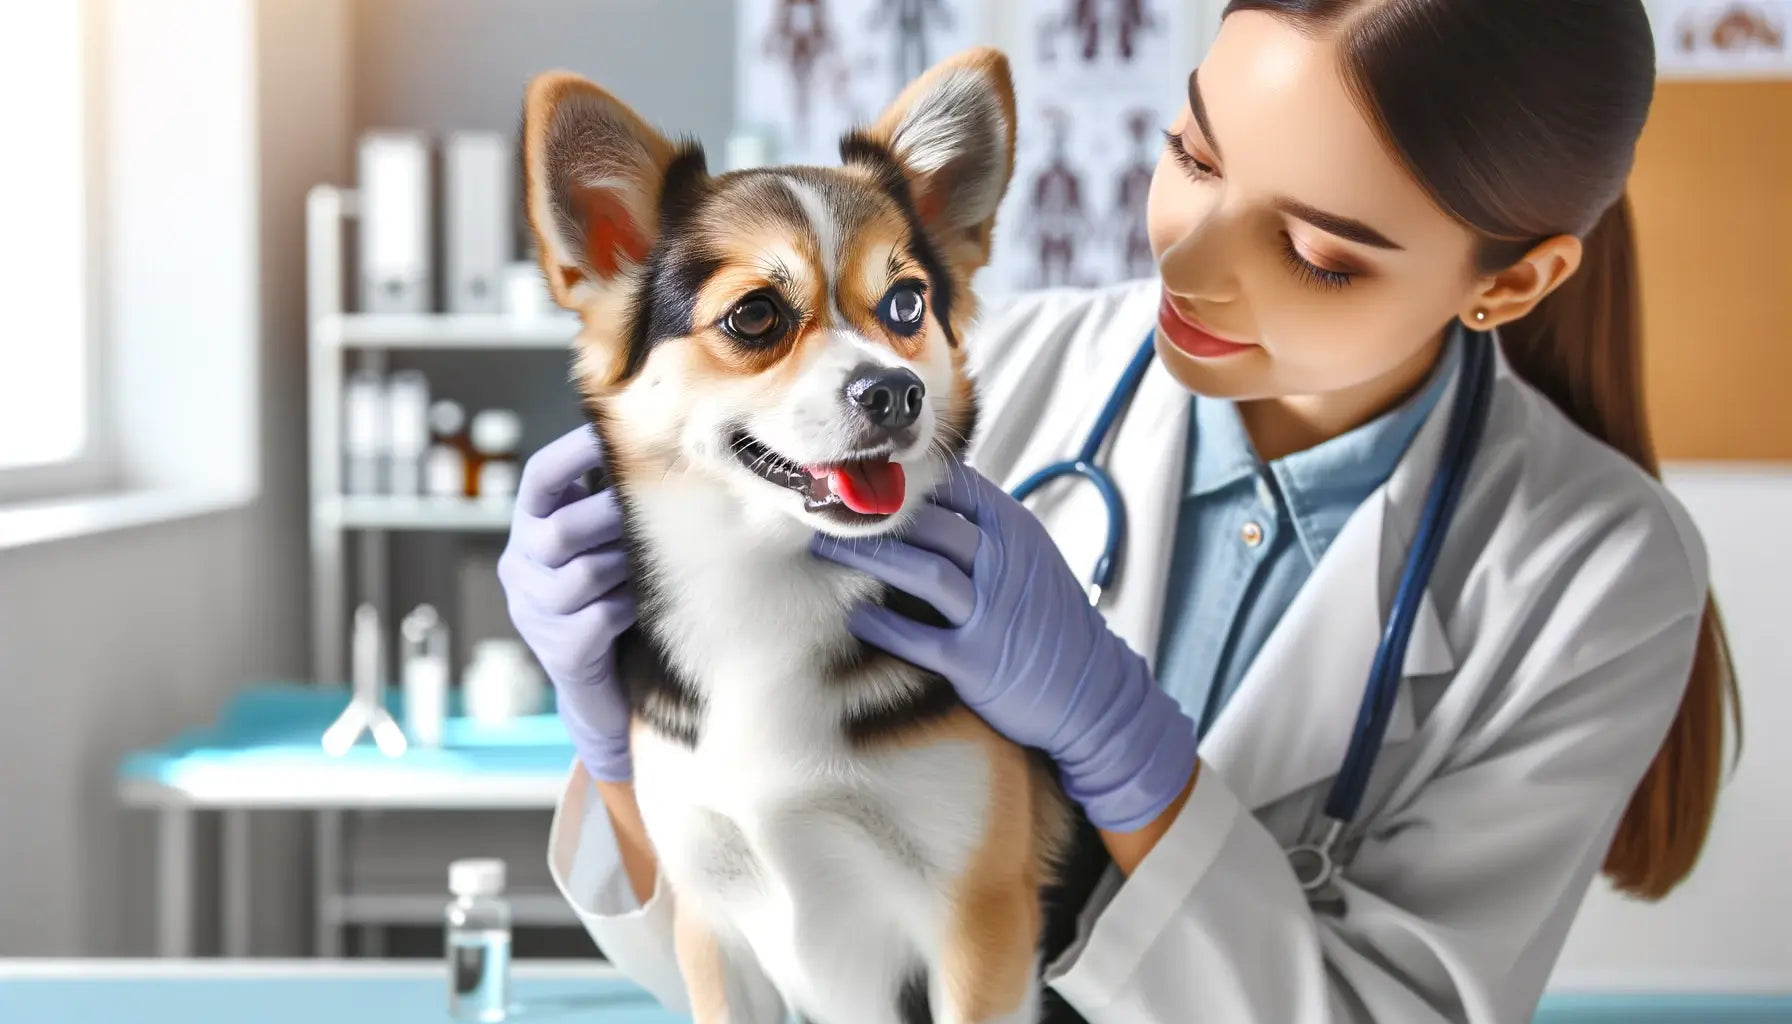 A Chihuahua Husky Mix undergoing a veterinary check-up in a clinic, focusing on its ears, eyes, and teeth.